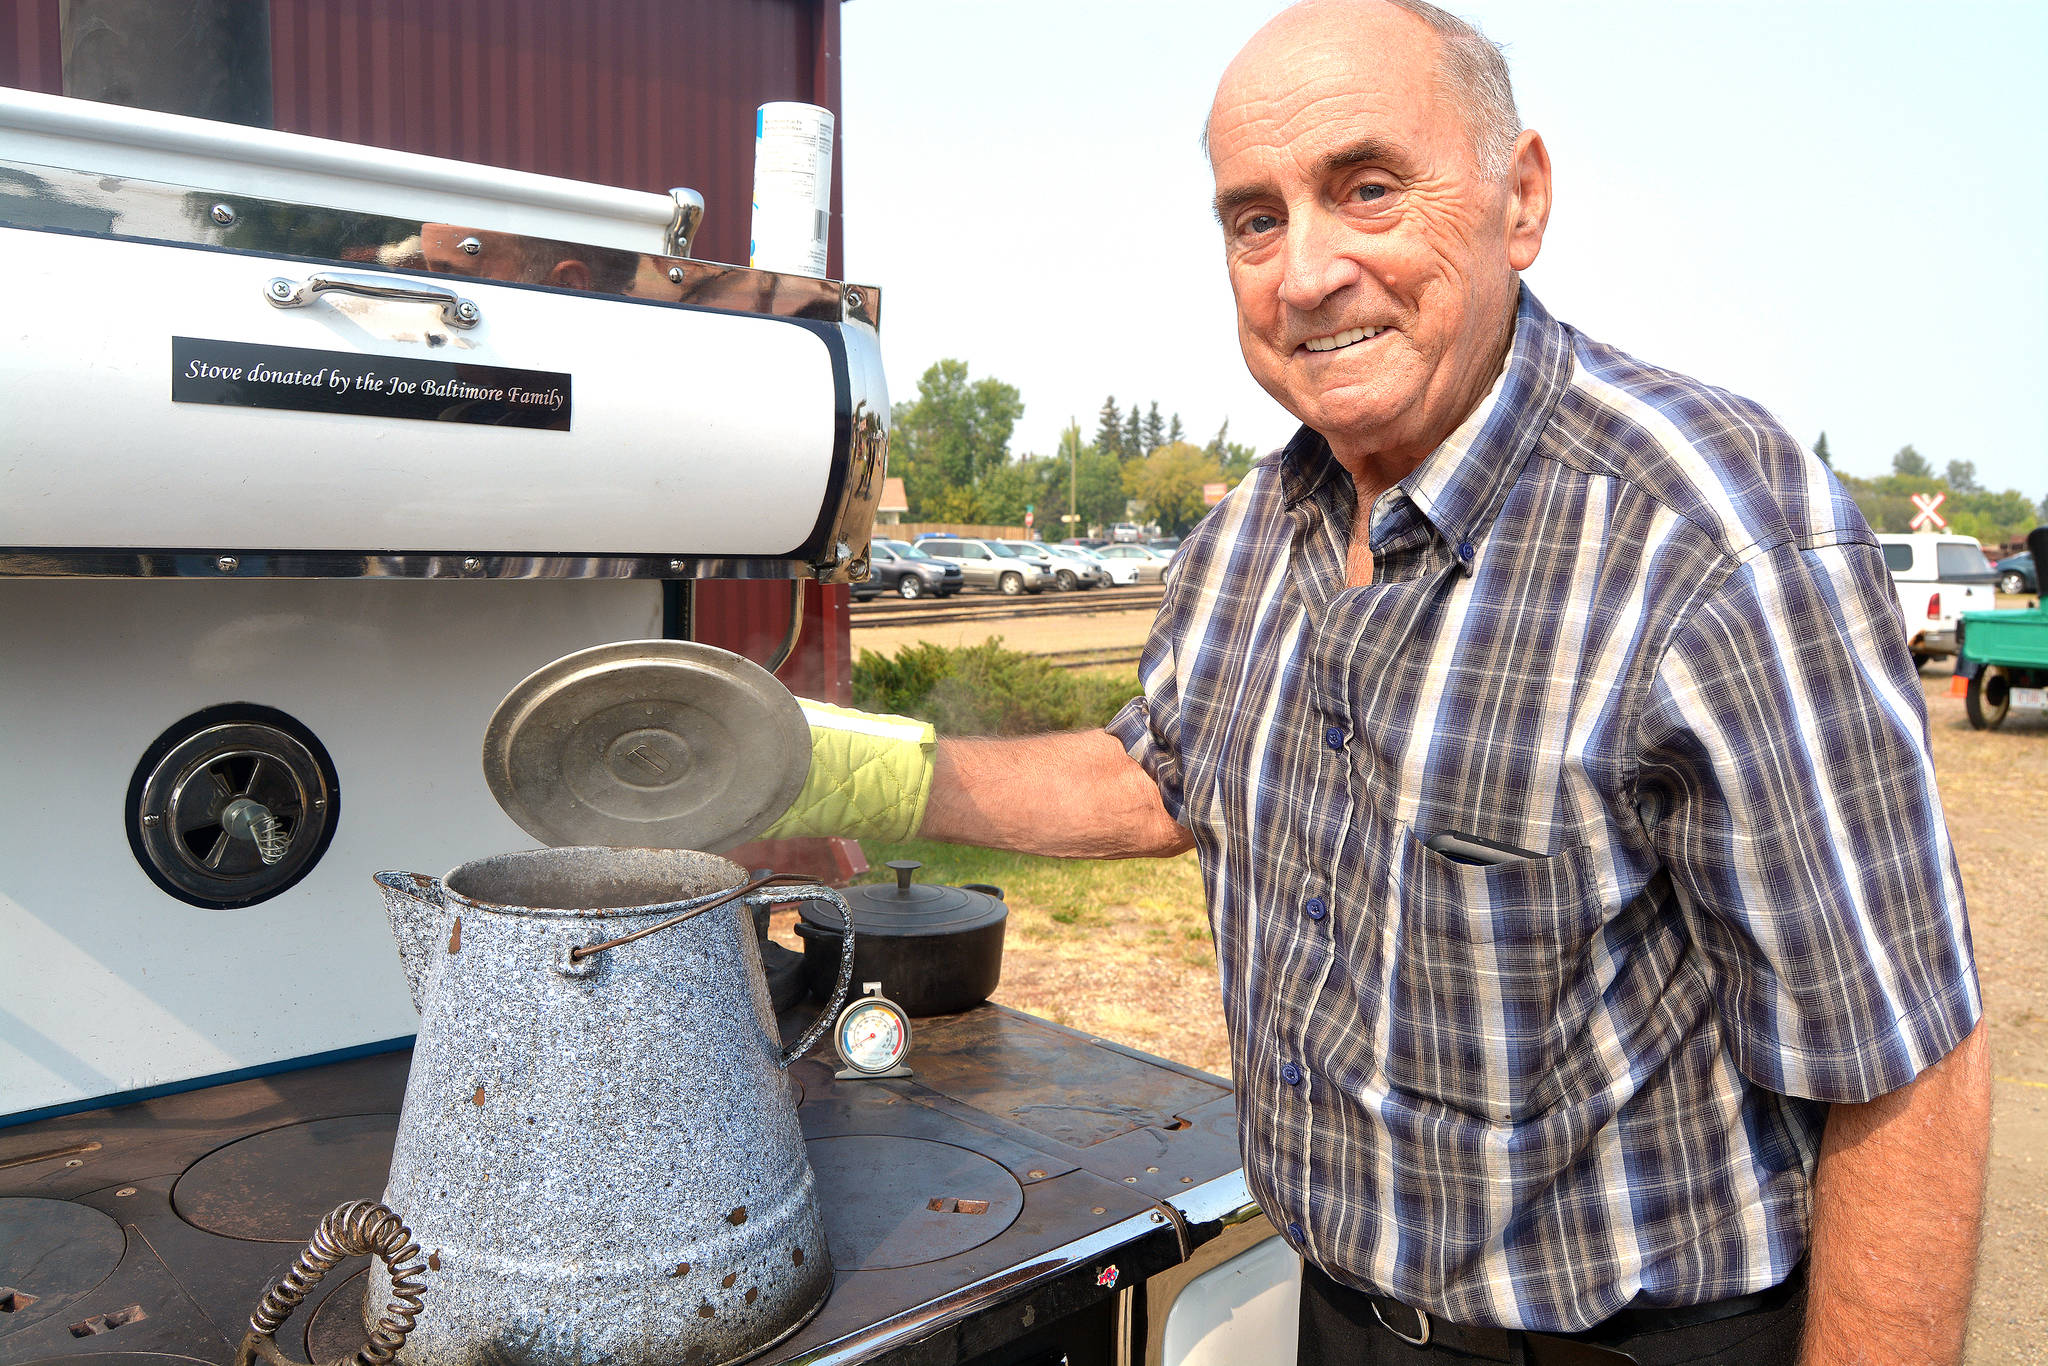 Coffee is on! Jim Stroud of drumheller brews a big pot of coffee on a wood stove during Stettler P & H Elevator Preservation Society’s annual fall supper Aug. 25. The stove was donated to the society by the Joe Baltimore family of Stettler. (Lisa Joy/Black Press)